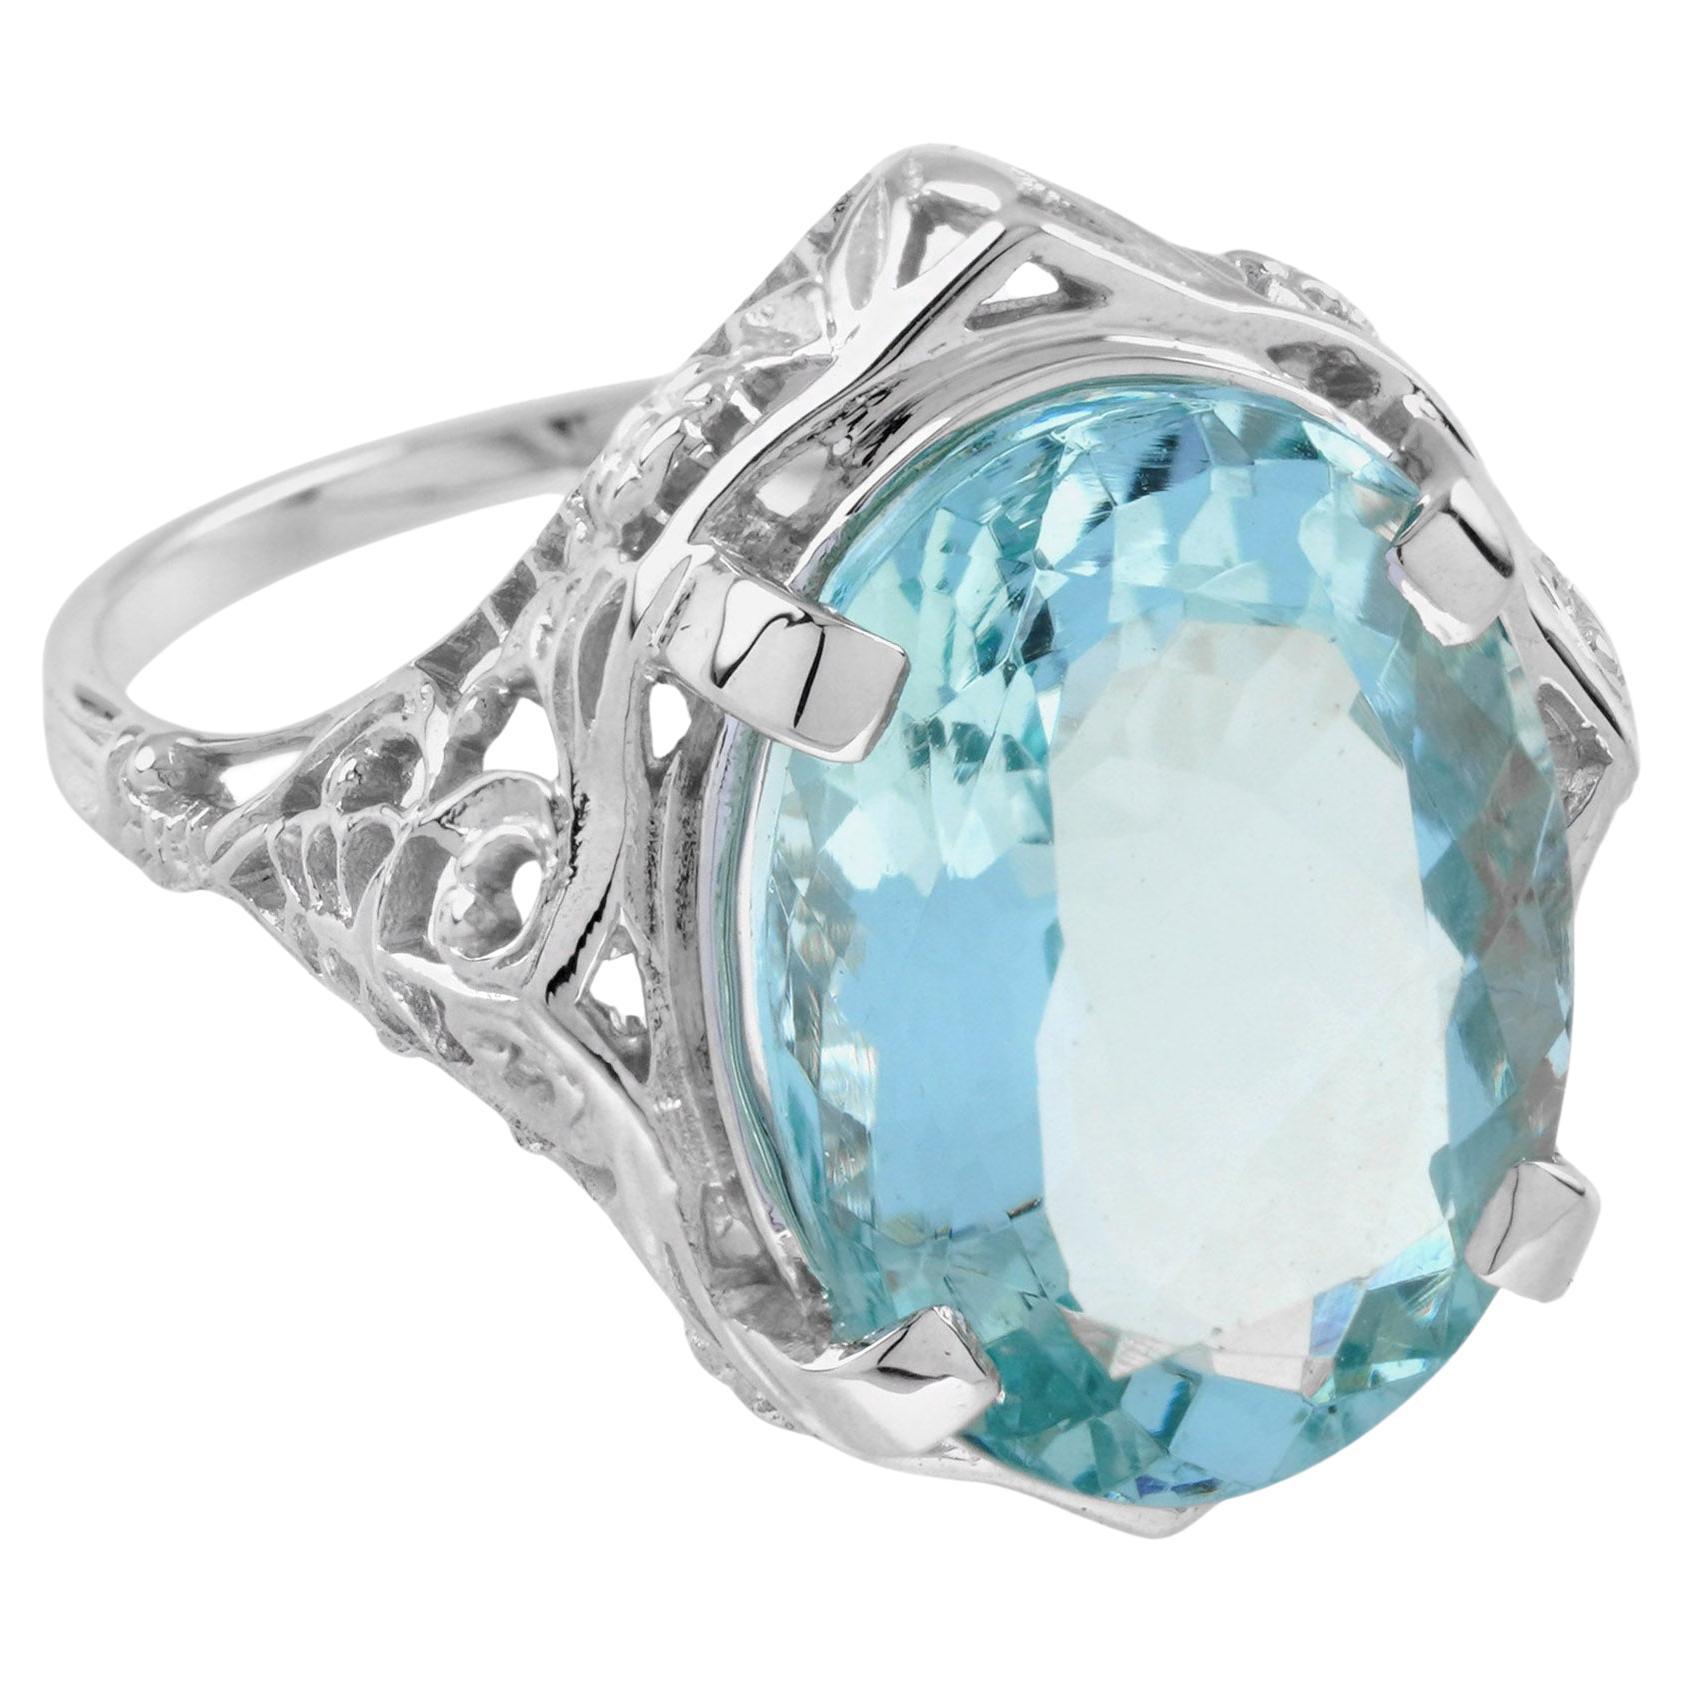 6.61 Ct. Natural Aquamarine Vintage Style Filigree Solitaire Ring in 14K Gold For Sale